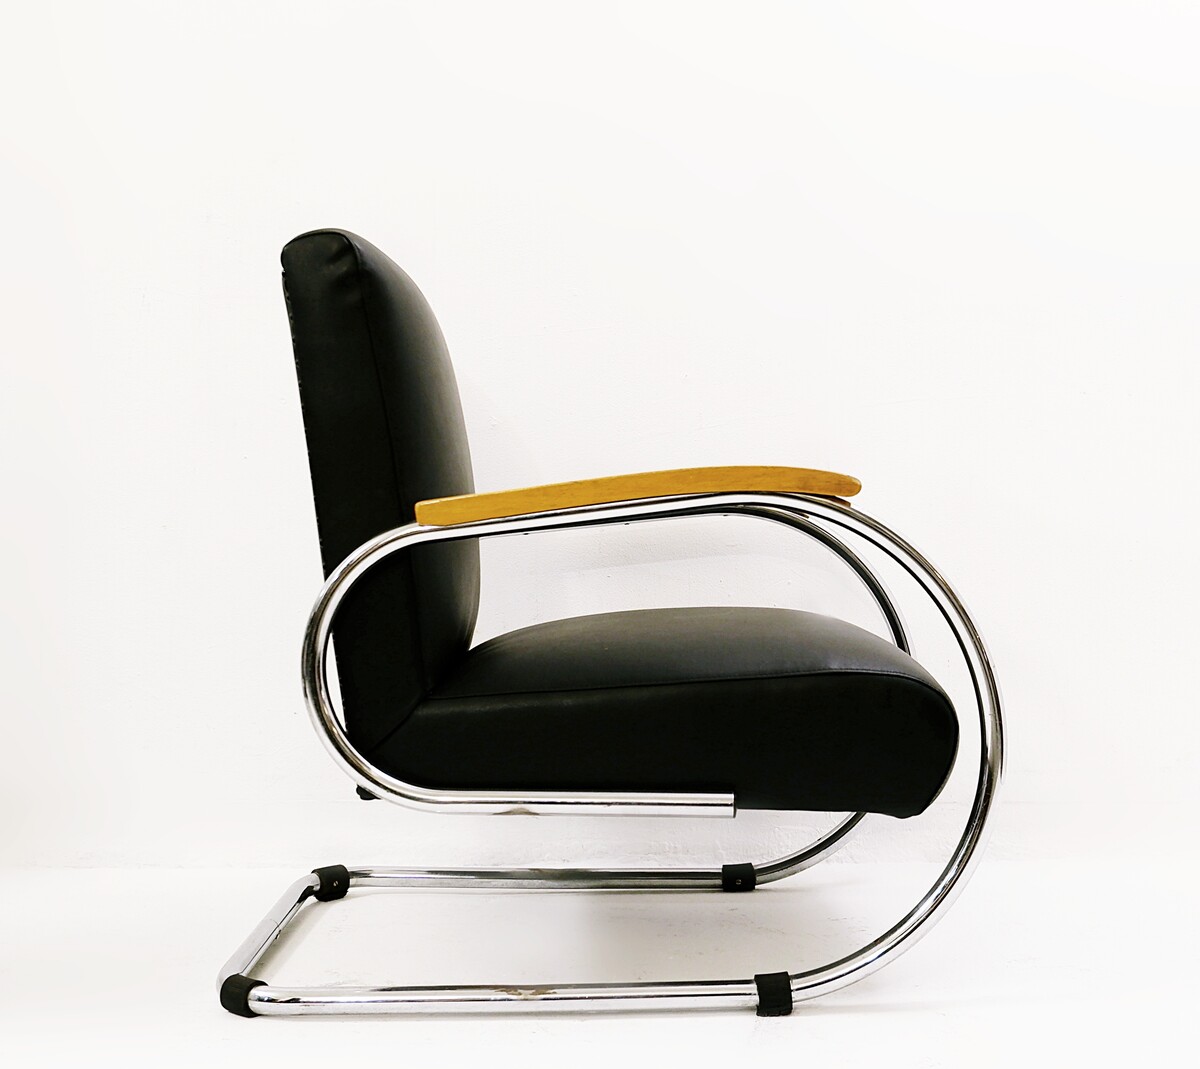 Mid Century Modern Armchair by Tubax - Belgium 1950s - New upholstery in black leatherette